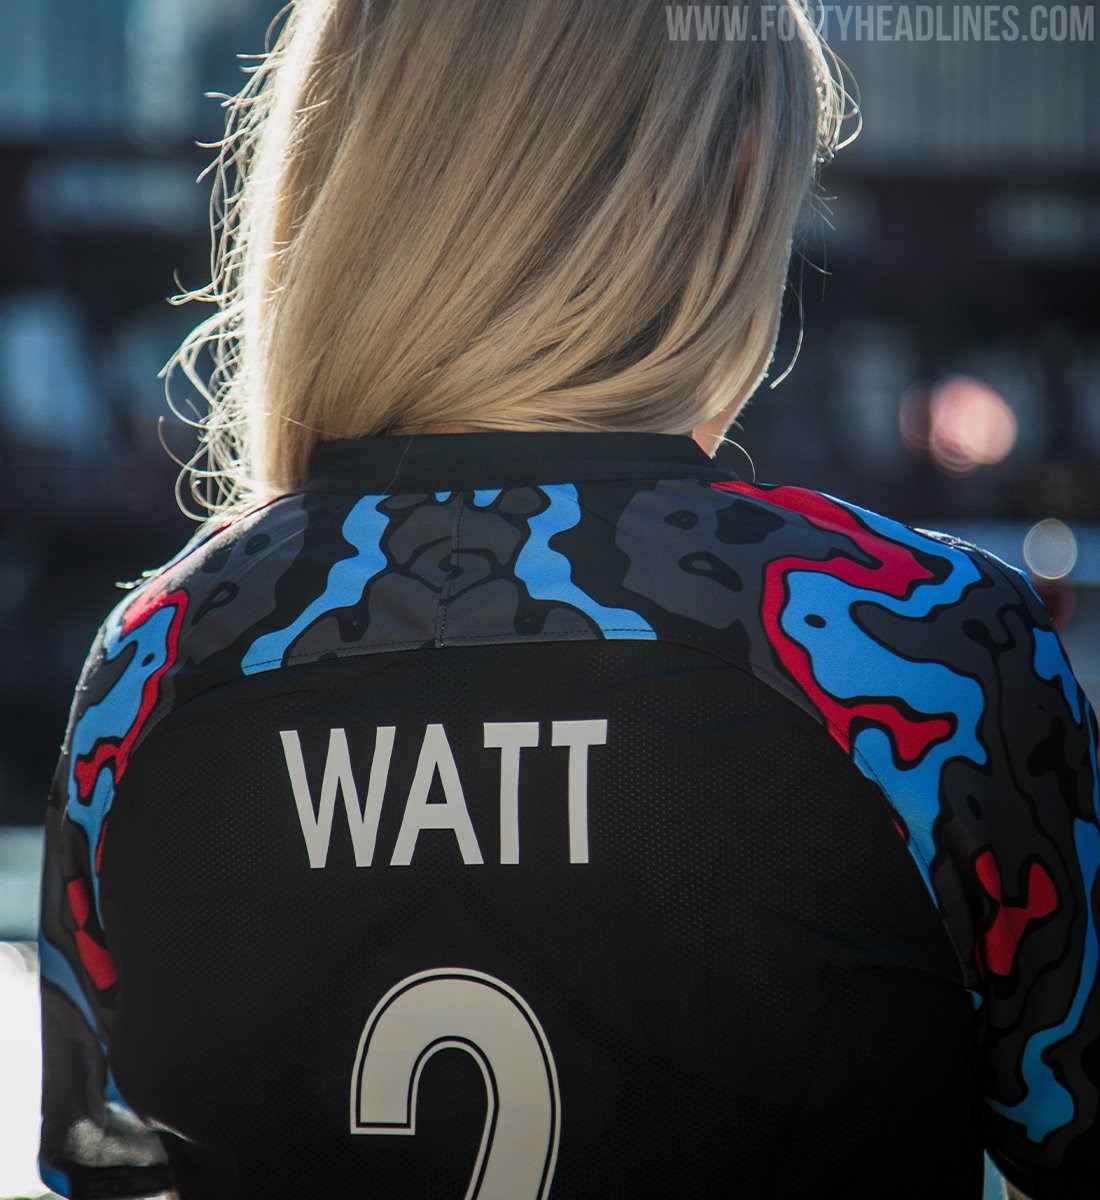 Chicago Red Stars 2019 Home Kit Released - Footy Headlines